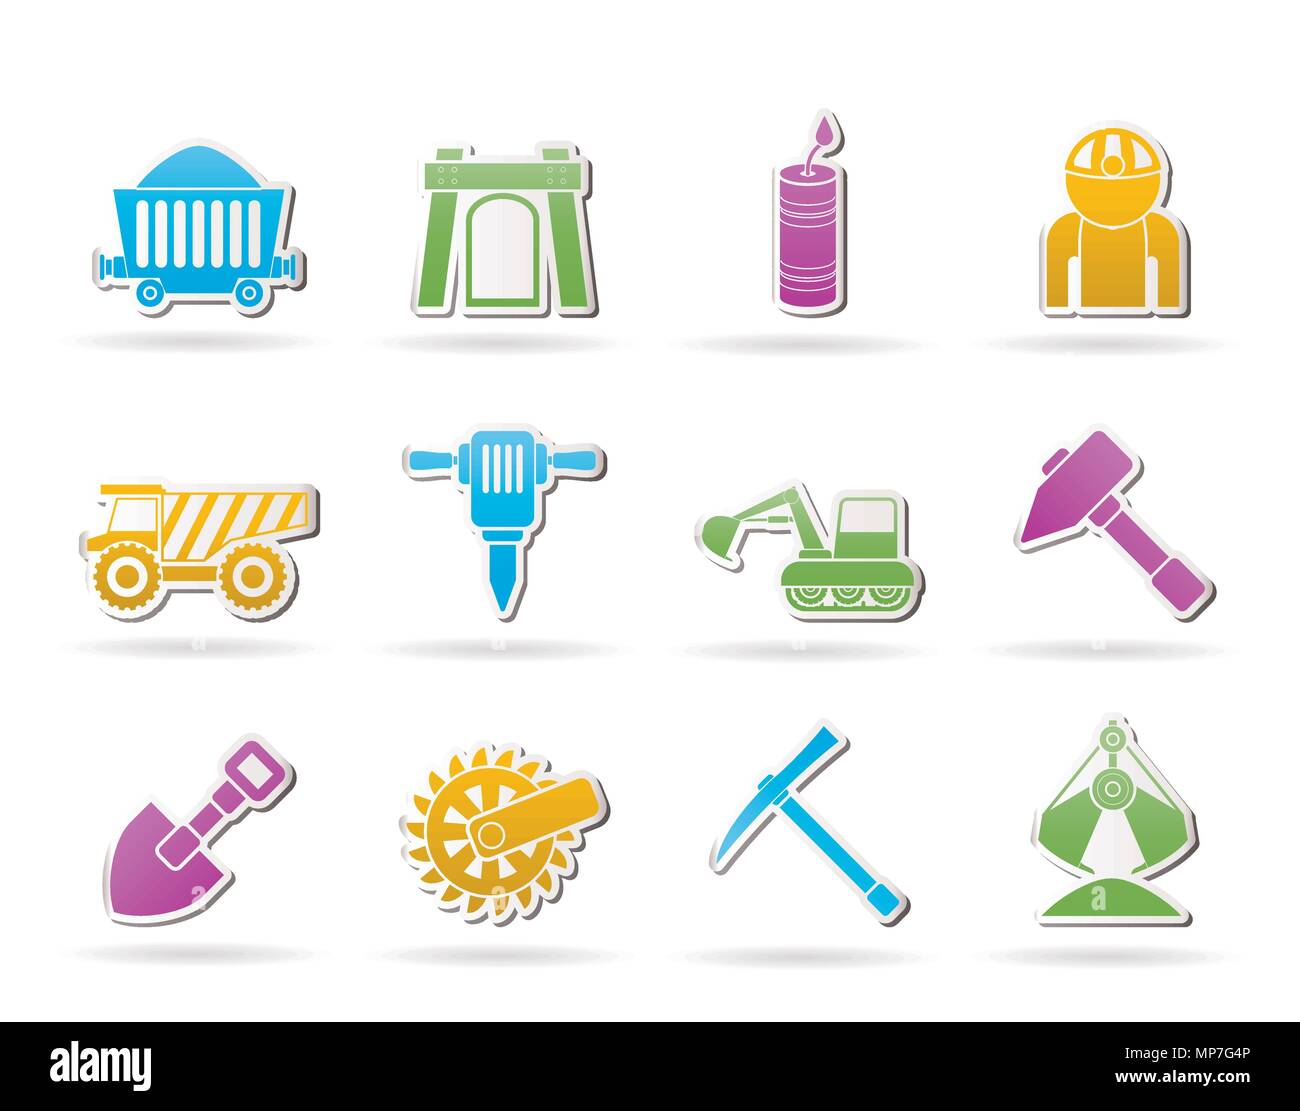 Mining and quarrying industry objects and icons - vector icon set Stock Vector